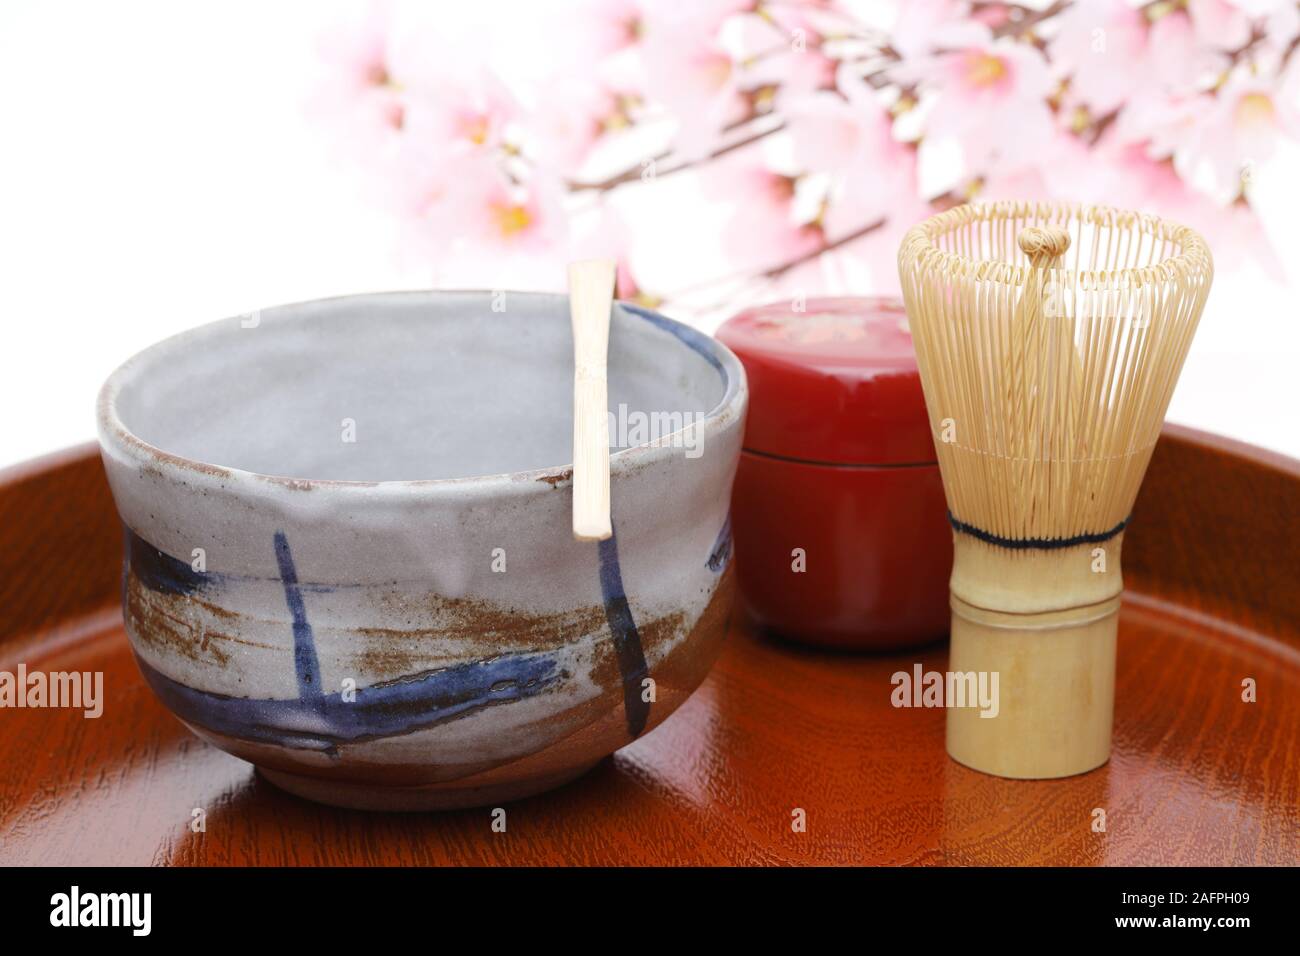 Tea bowl with tea whisk and bamboo spoon used in Japanese matcha green tea ceremony Stock Photo